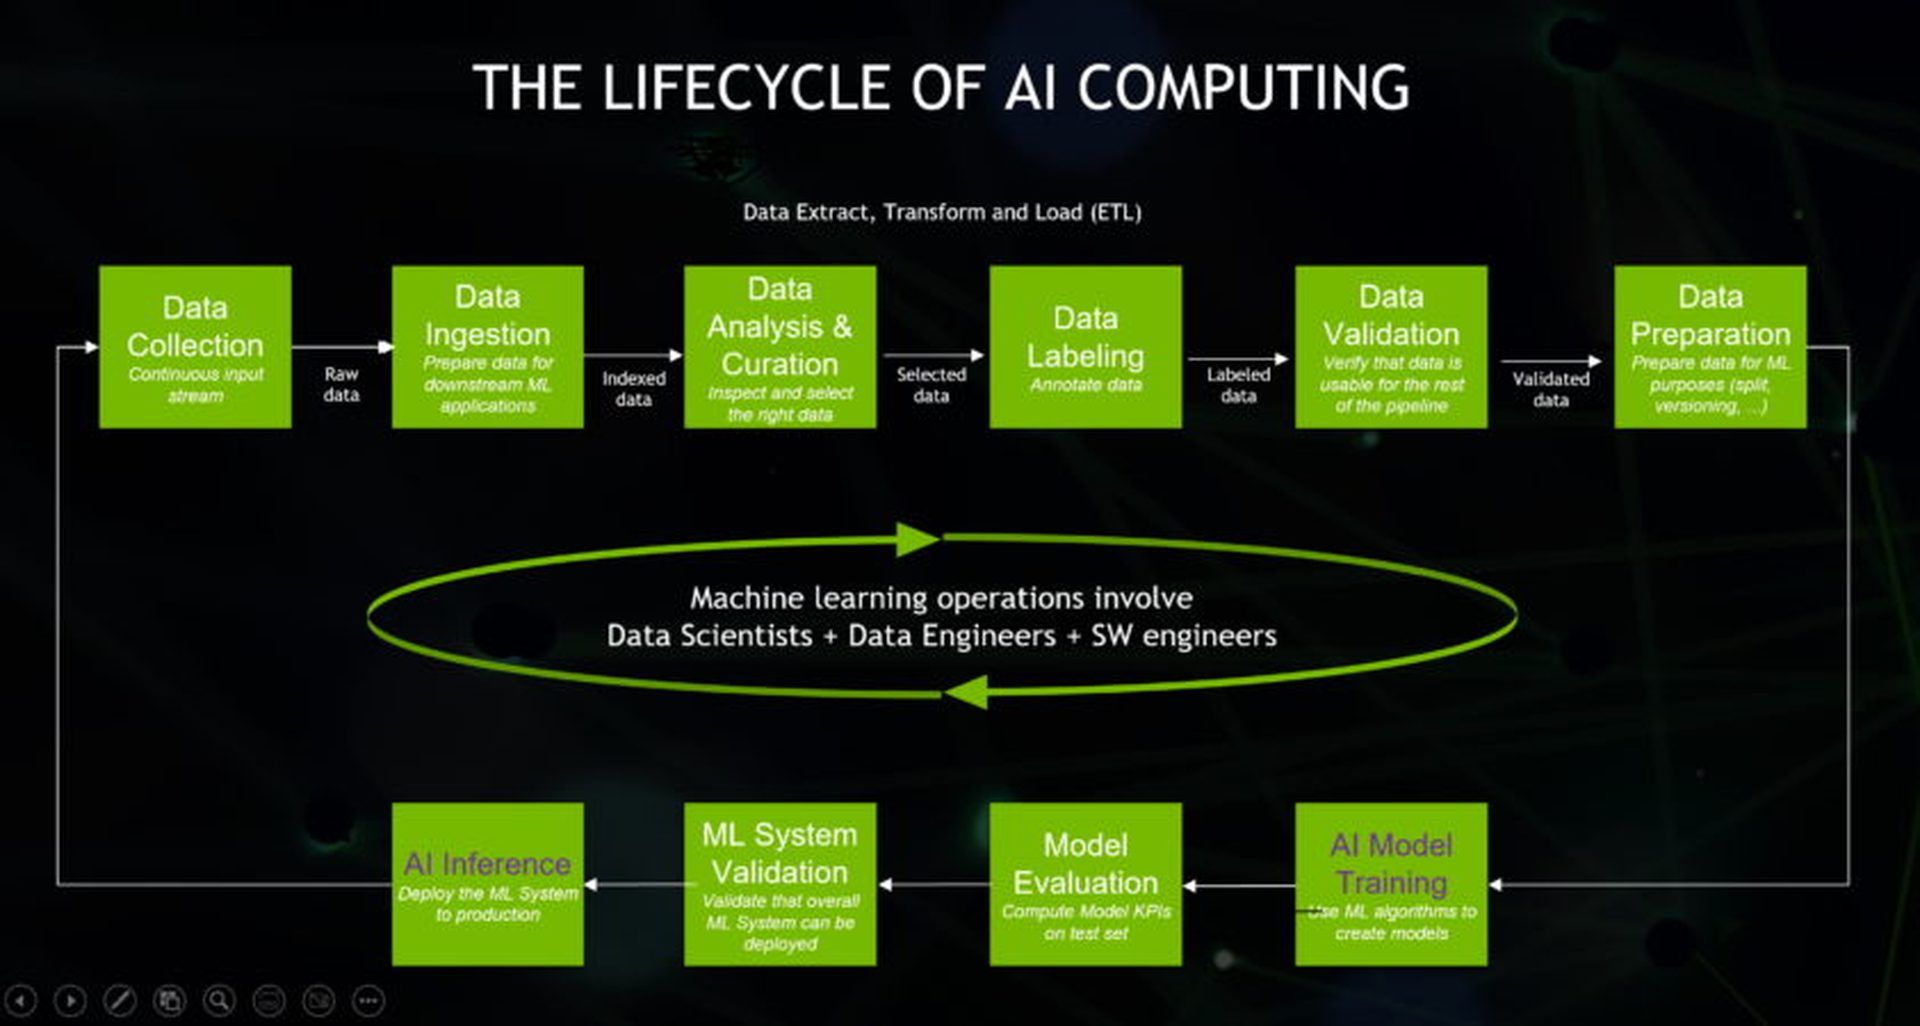 What is an AI computer / computing? Learn the best AI computer examples and find out why they are rising. Keep reading and explore the AI world!